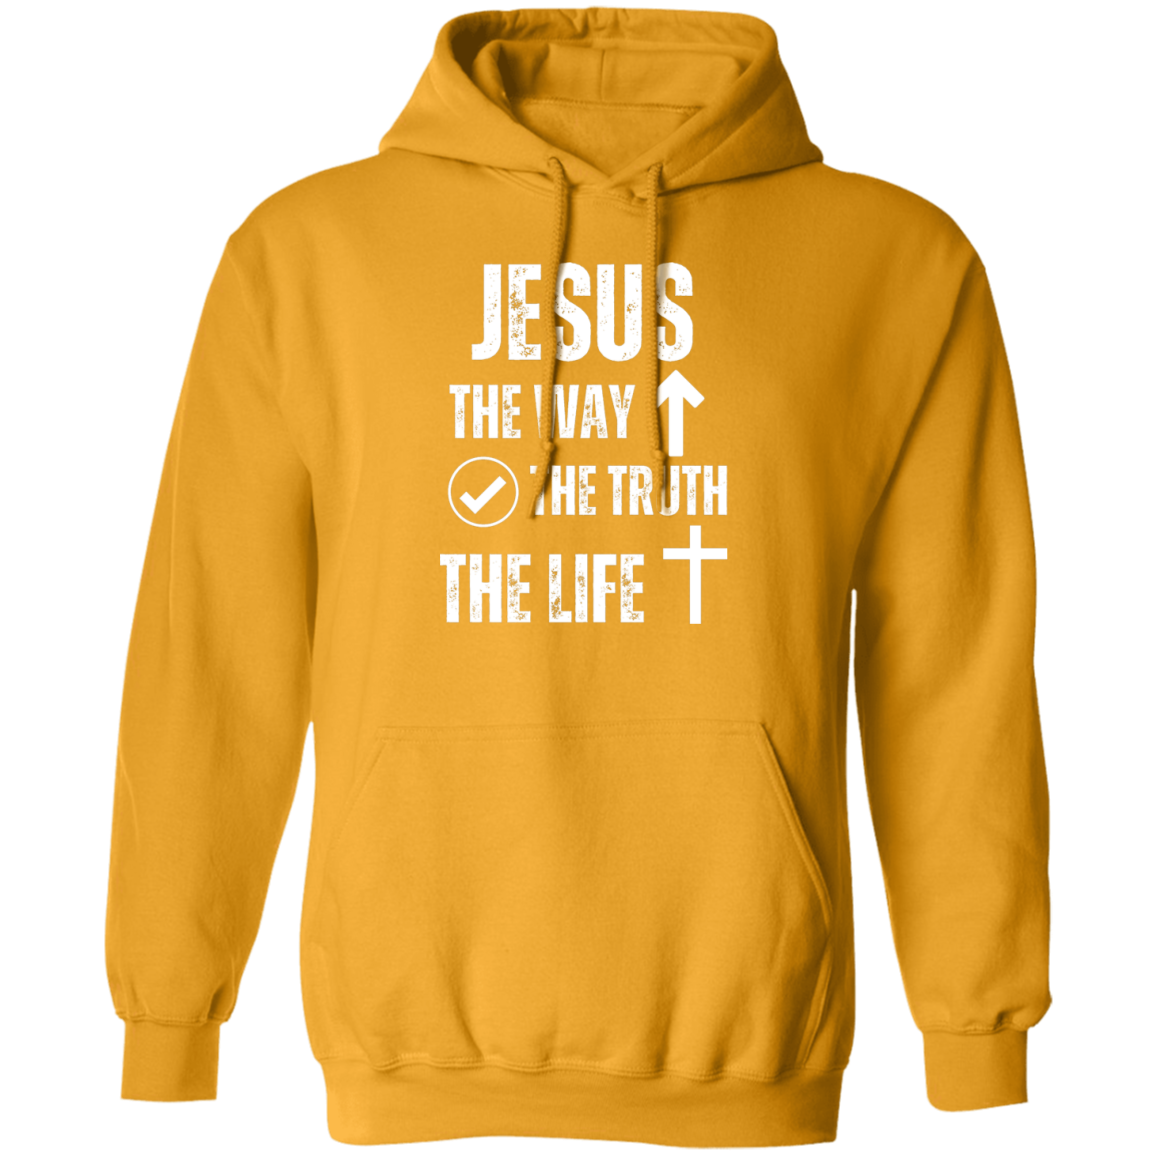 Jesus - The Way, The Truth, The Life Pullover Hoodie